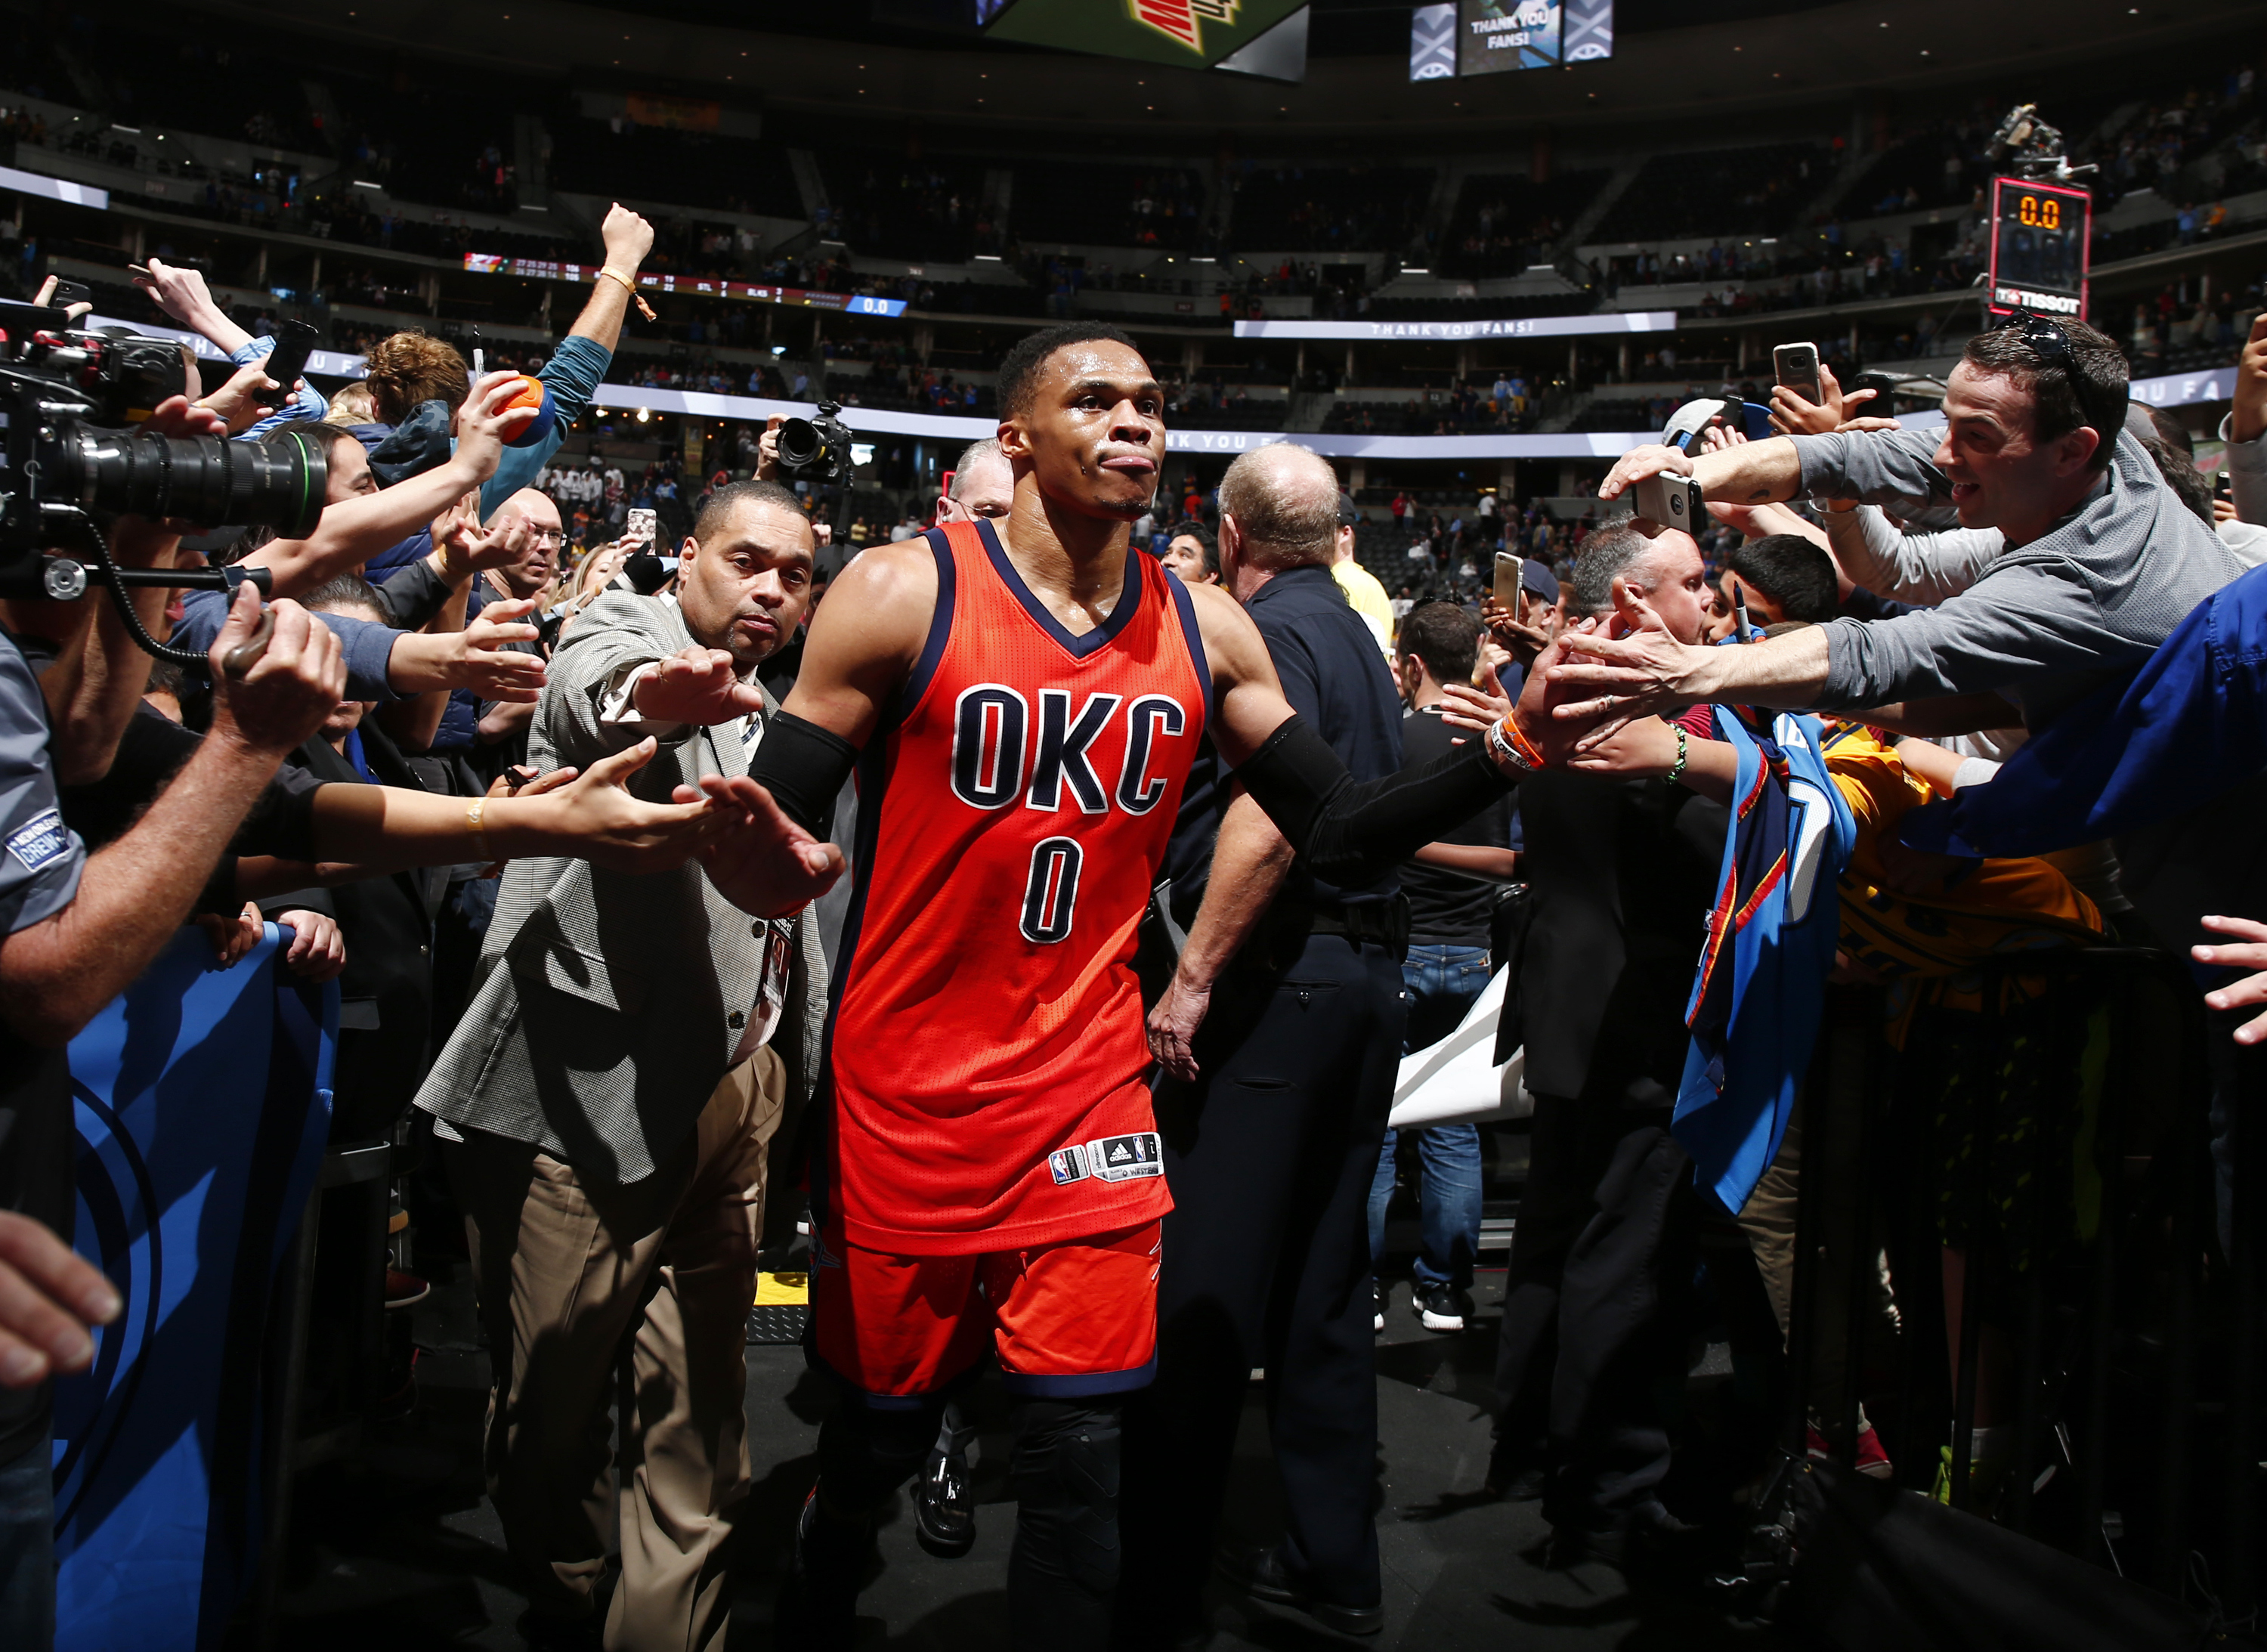 Oklahoma City Thunder guard Russell Westbrook celebrates after hitting a buzzer beating three point shot to win the game against the Denver Nuggets Sunday, April 9, 2017, in Denver. Oklahoma City defeated Denver 106-105. Westbrook also broke the NBA record for triple doubles with 42 for the season. (AP Photo/Jack Dempsey)